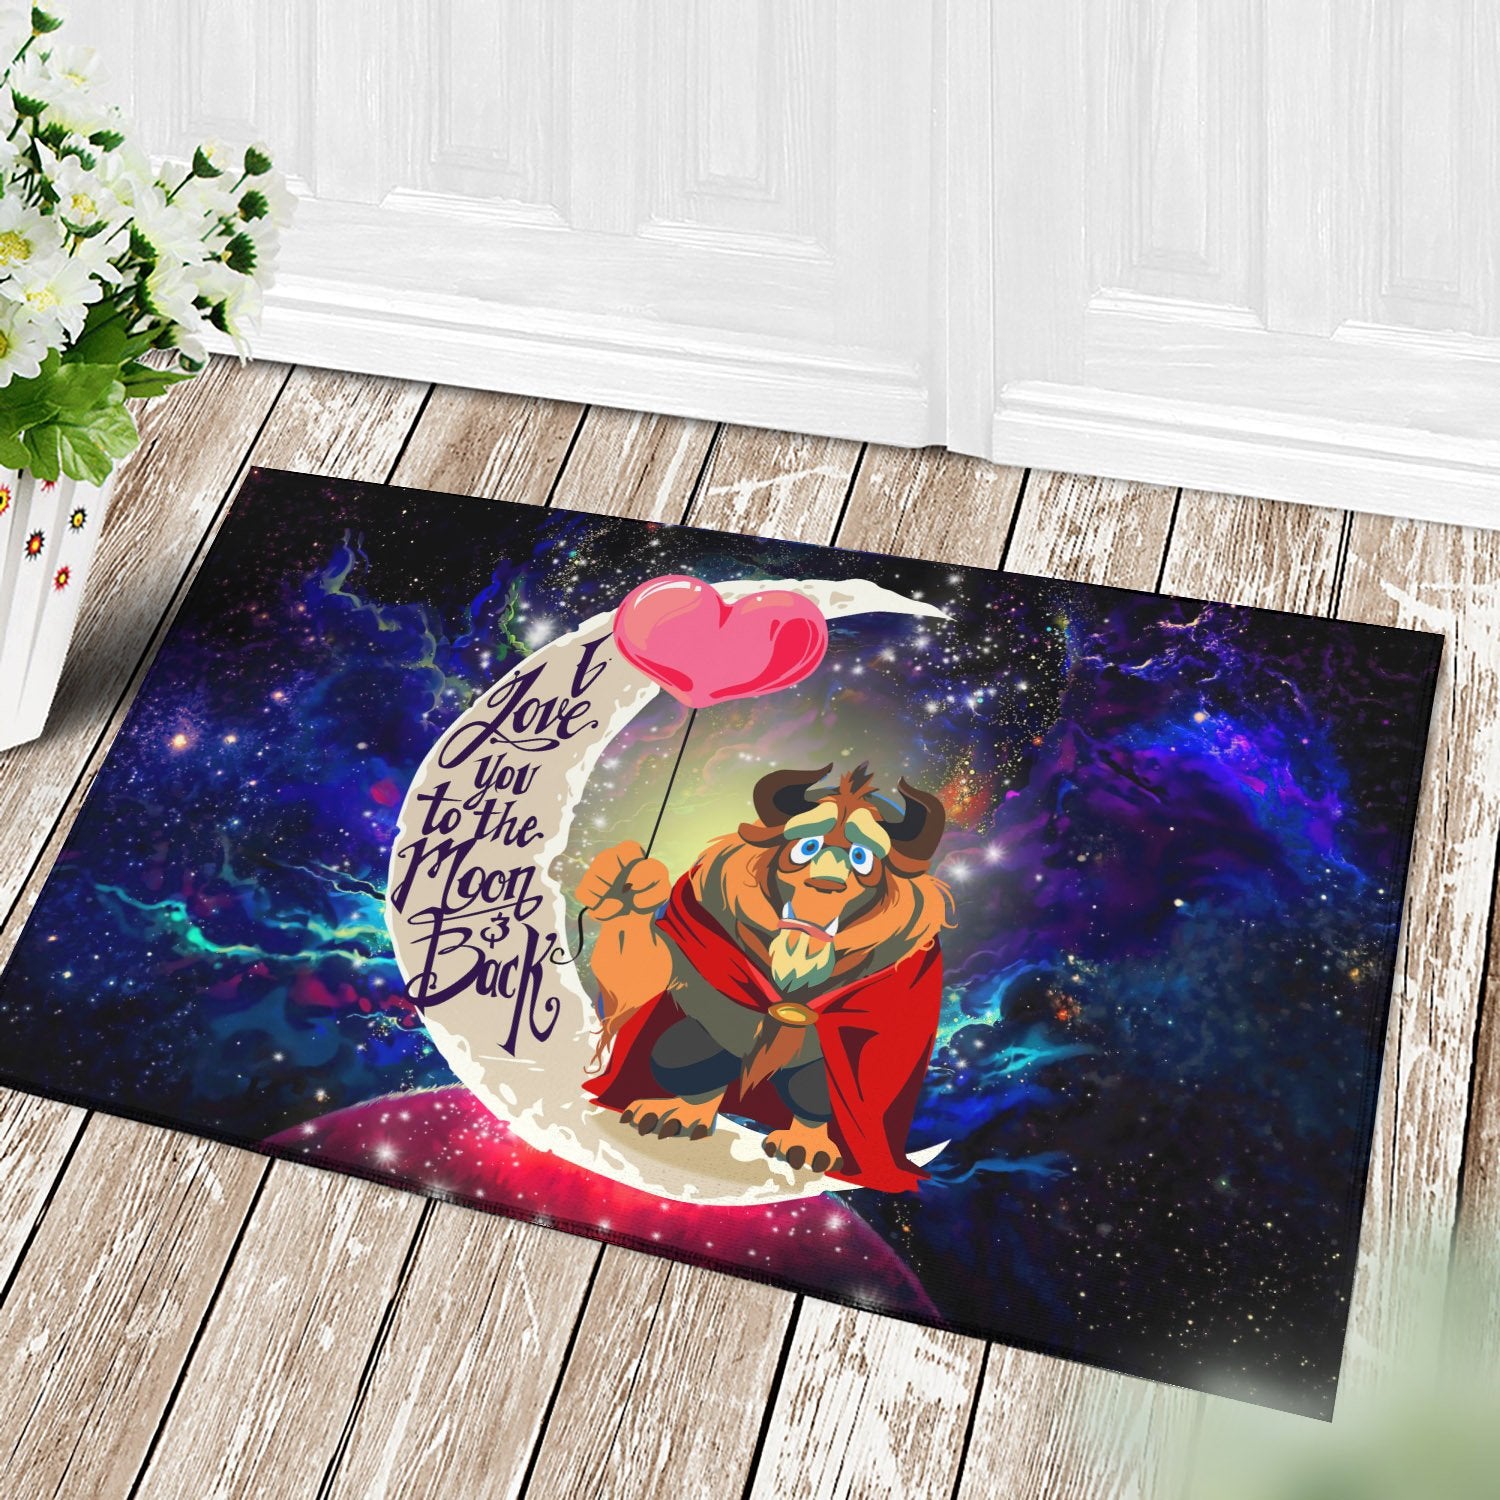 Beauty And The Beast Love You To The Moon Galaxy Back Door Mats Home Decor